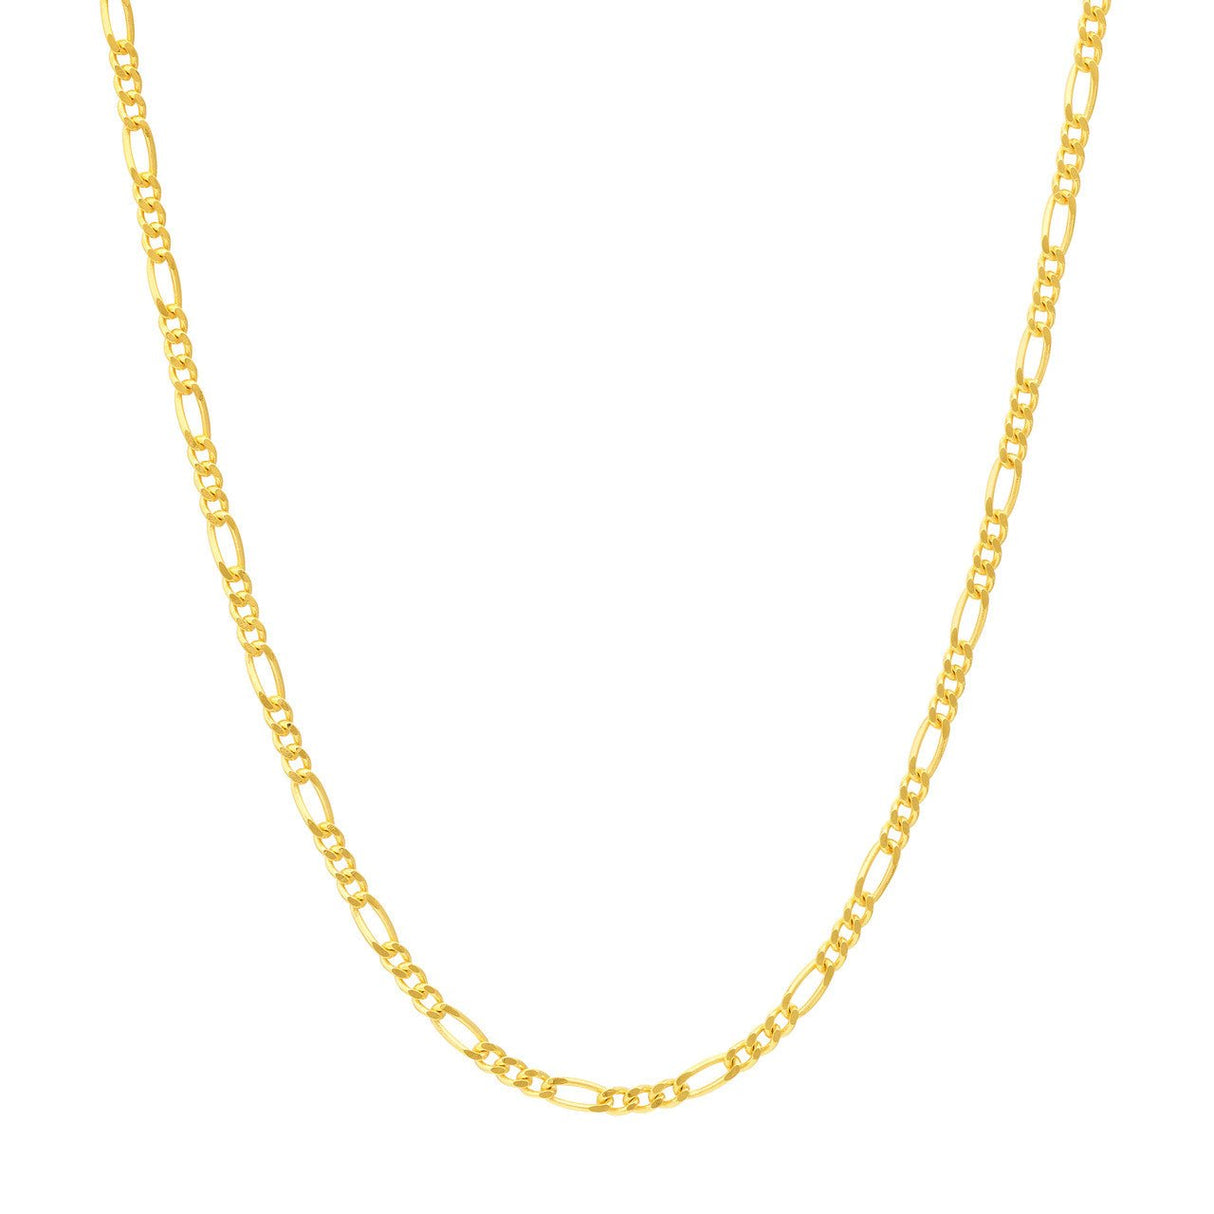 14K Gold Chain, 24", 1.30mm Figaro Chain with Spring Ring, Gold Layered Chain, Gold Necklaces - Diamond Origin, solid gold chain, solid gold choker,14k solid gold chain